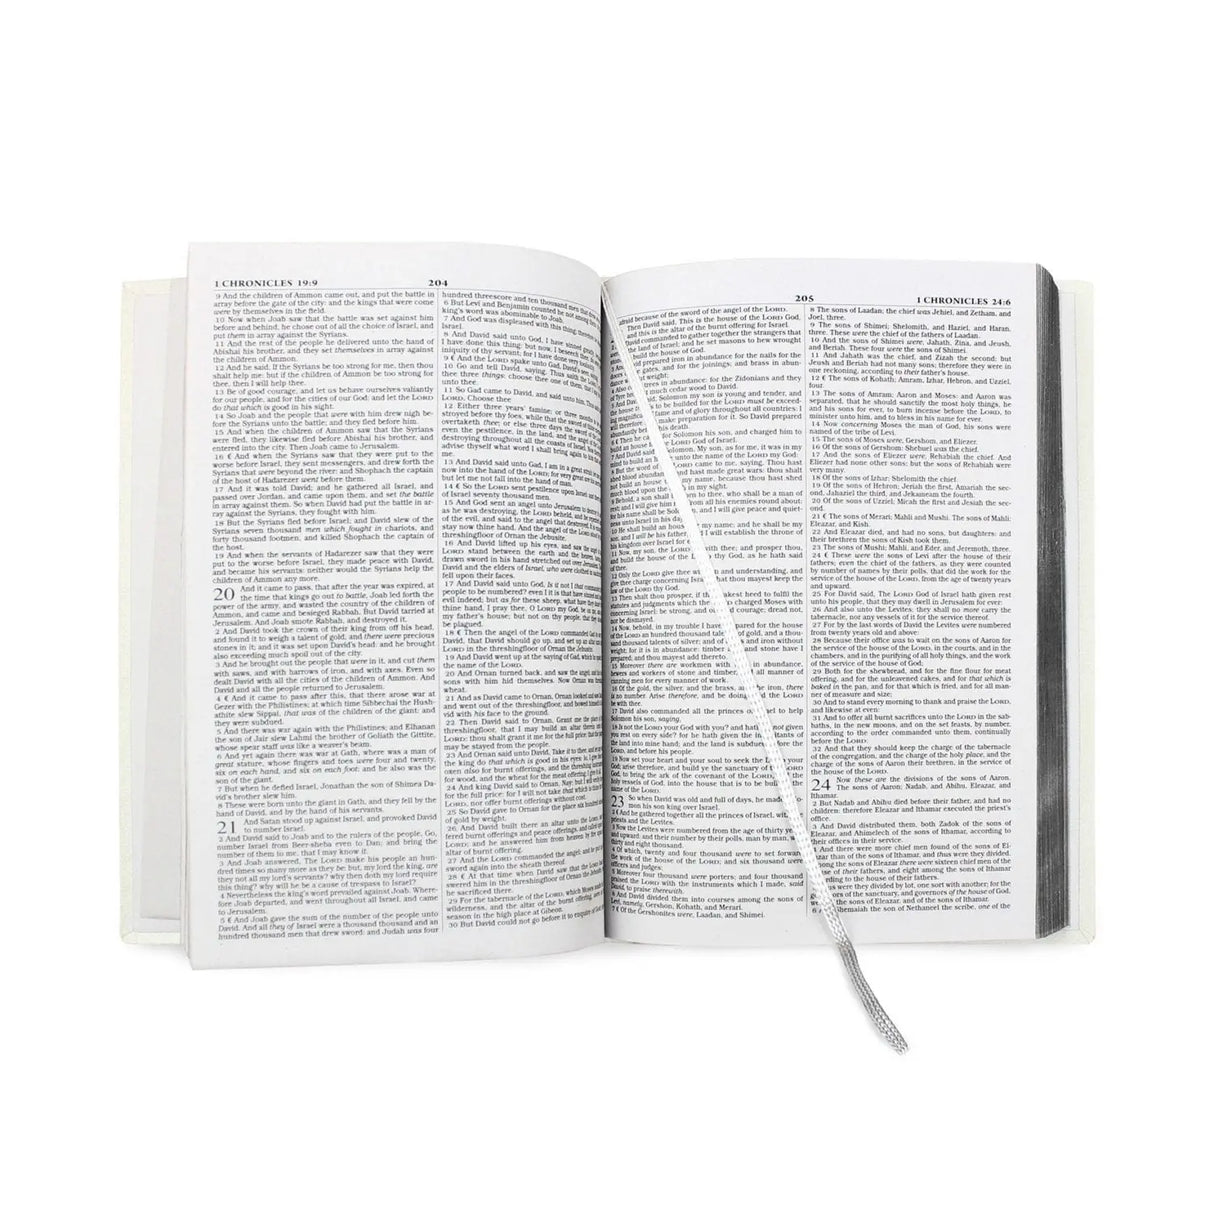 Personalised Gold Holy Bible - Eco-friendly - Gift Moments